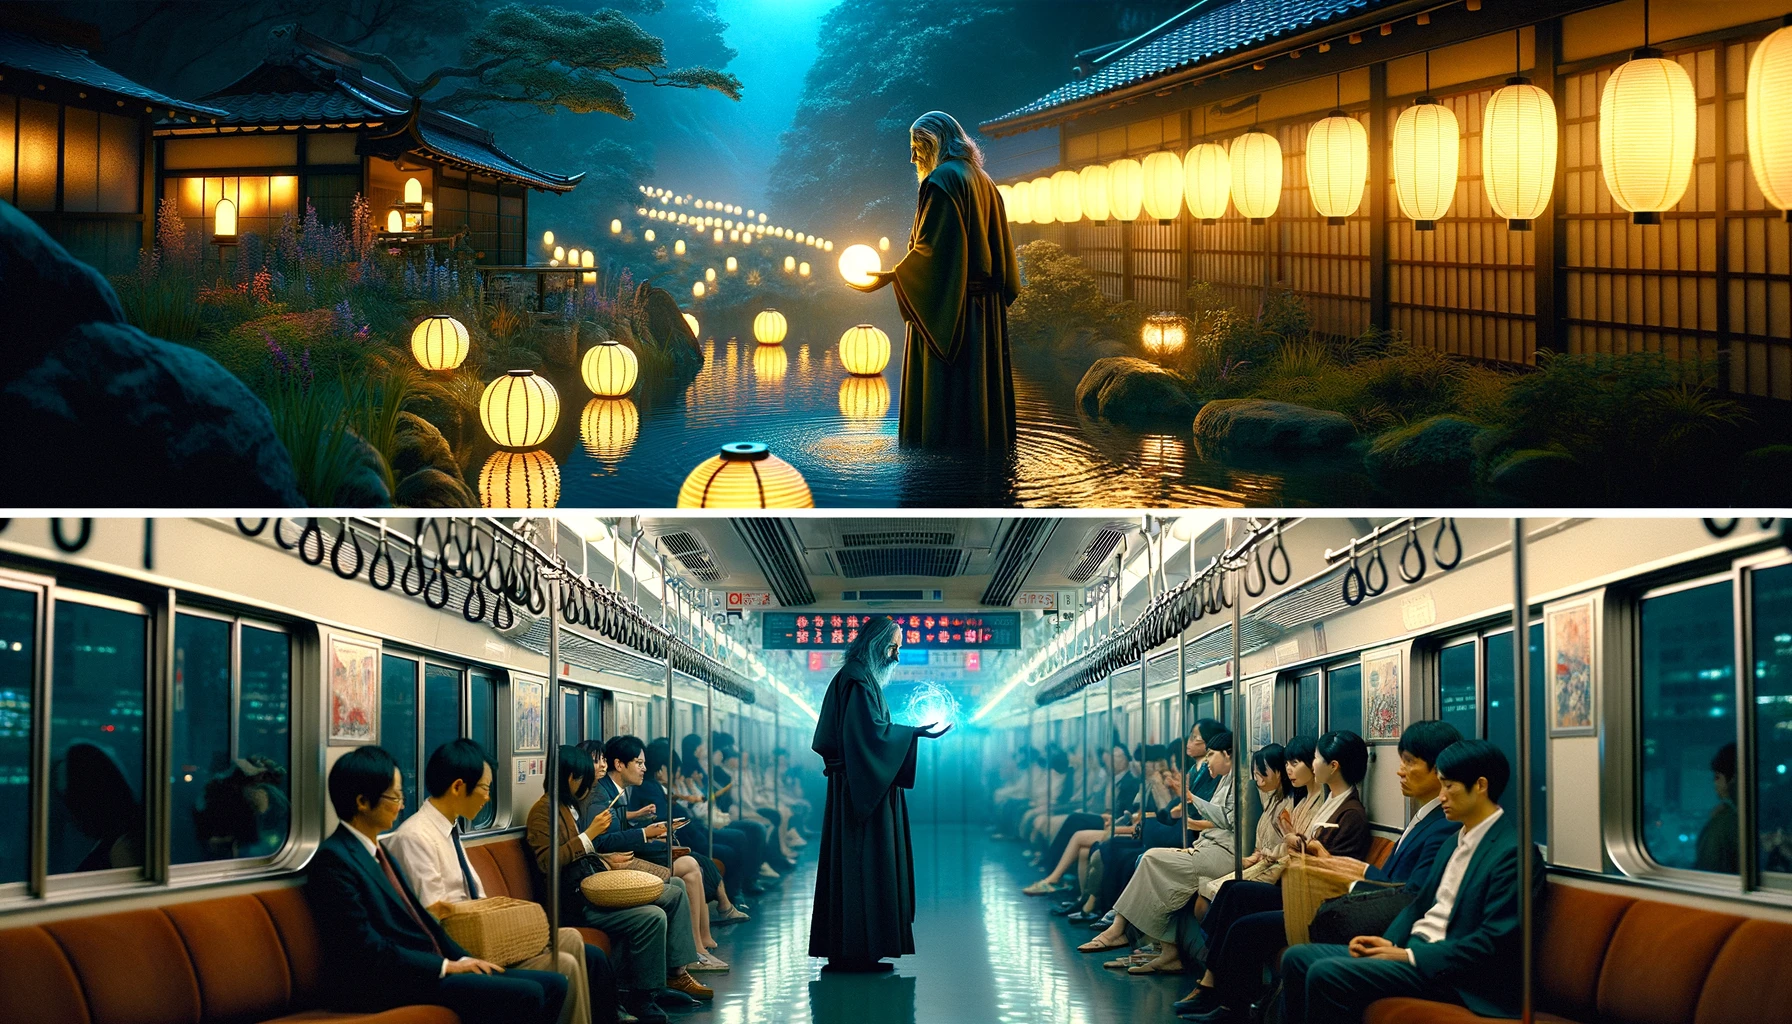 A continuation of the previous scenes featuring the same fantasy film villain in Japan. The first scene shows the villain in a serene Japanese garden at night, surrounded by glowing paper lanterns, casting a mysterious spell over a tranquil pond. This contrasts with the vibrant city scenes. The second image captures the villain on a crowded subway train, using subtle magic to influence the thoughts of unsuspecting passengers, with elements of traditional Japanese decor subtly integrated into the train's design.